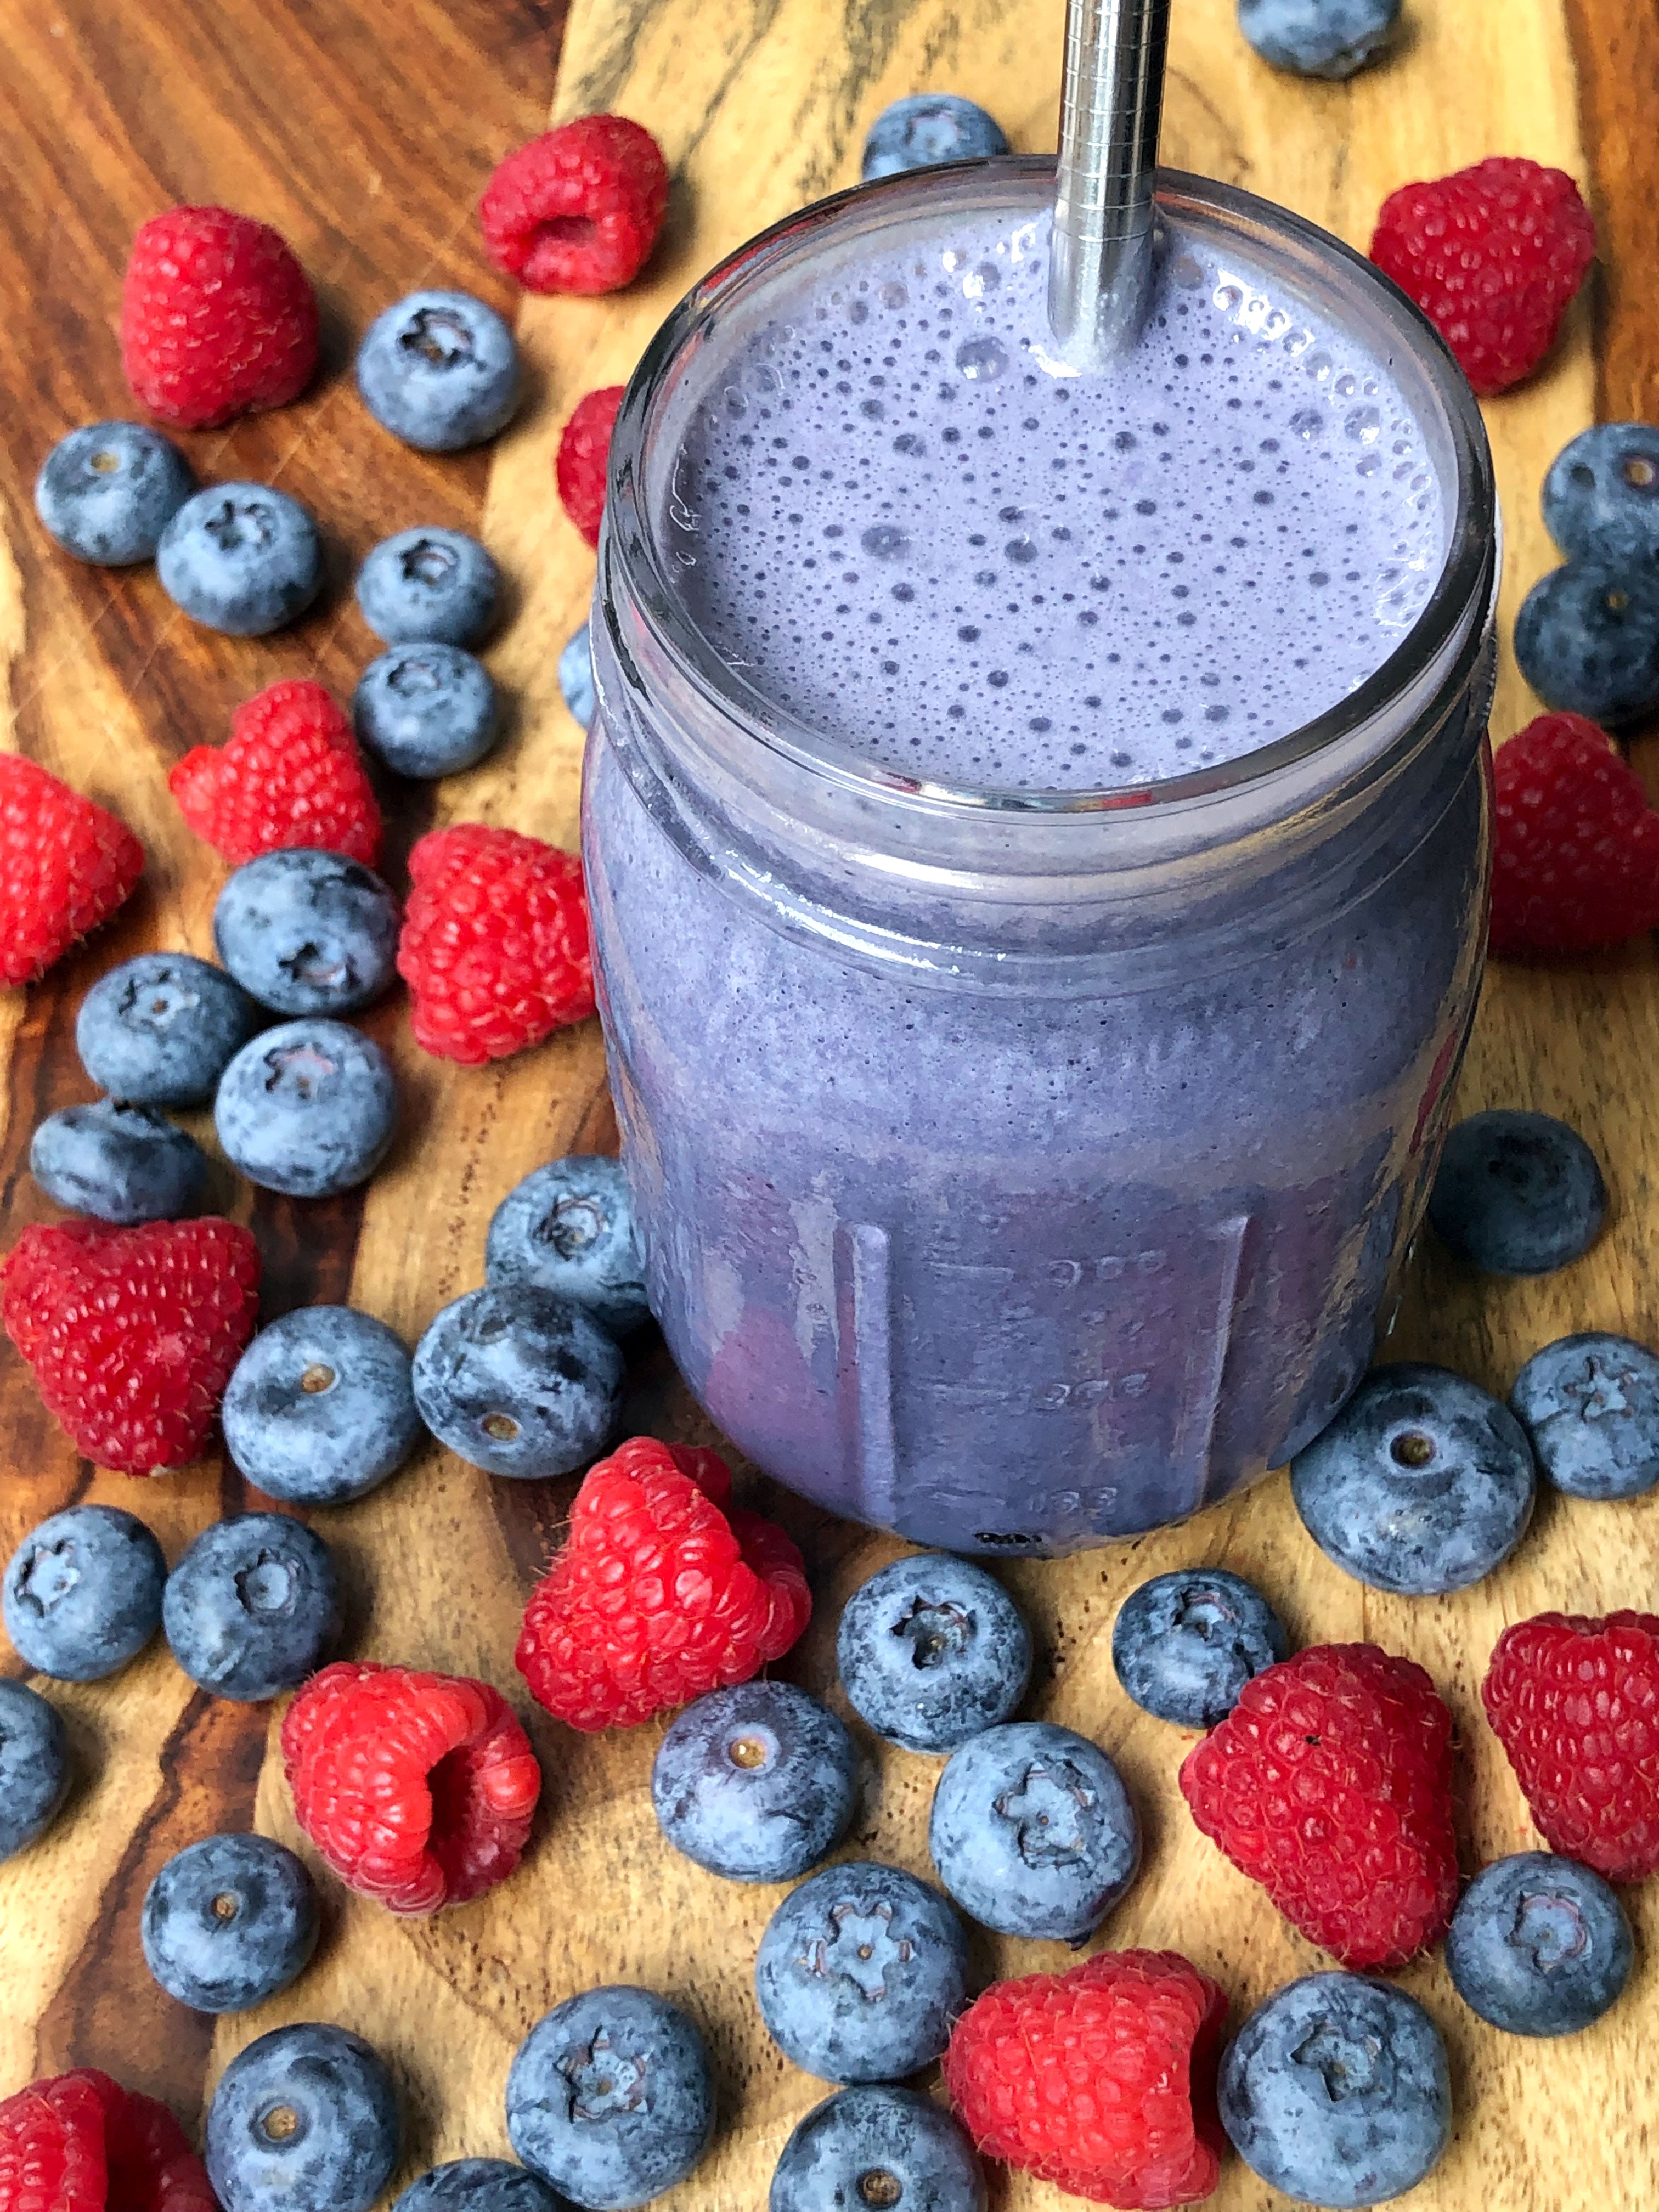 Want To Lose Weight? This Is The One Anti-Inflammatory Shake